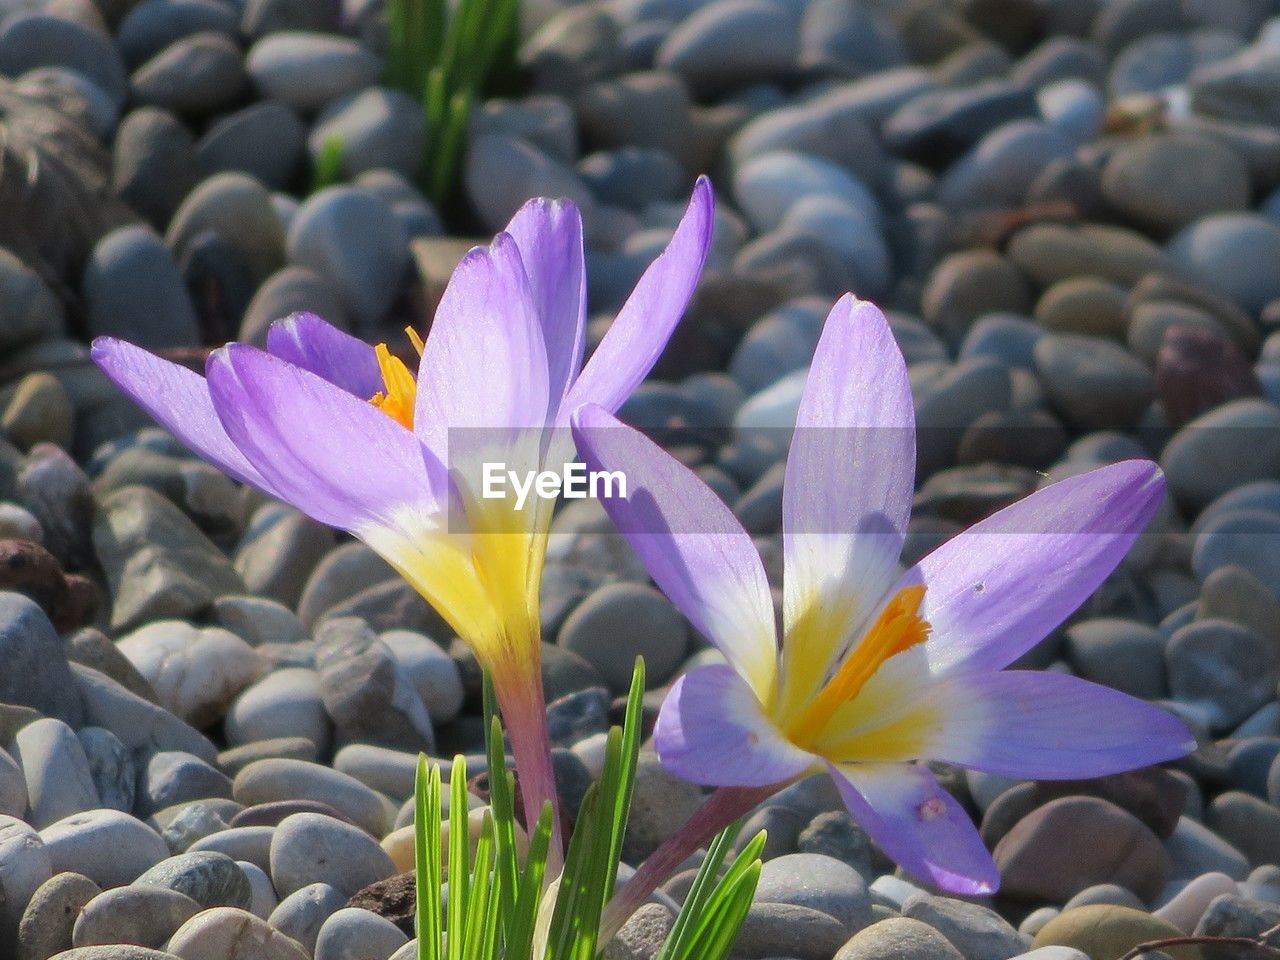 flower, flowering plant, plant, crocus, beauty in nature, freshness, purple, nature, close-up, petal, no people, fragility, iris, flower head, growth, water, inflorescence, outdoors, focus on foreground, day, land, springtime, pebble